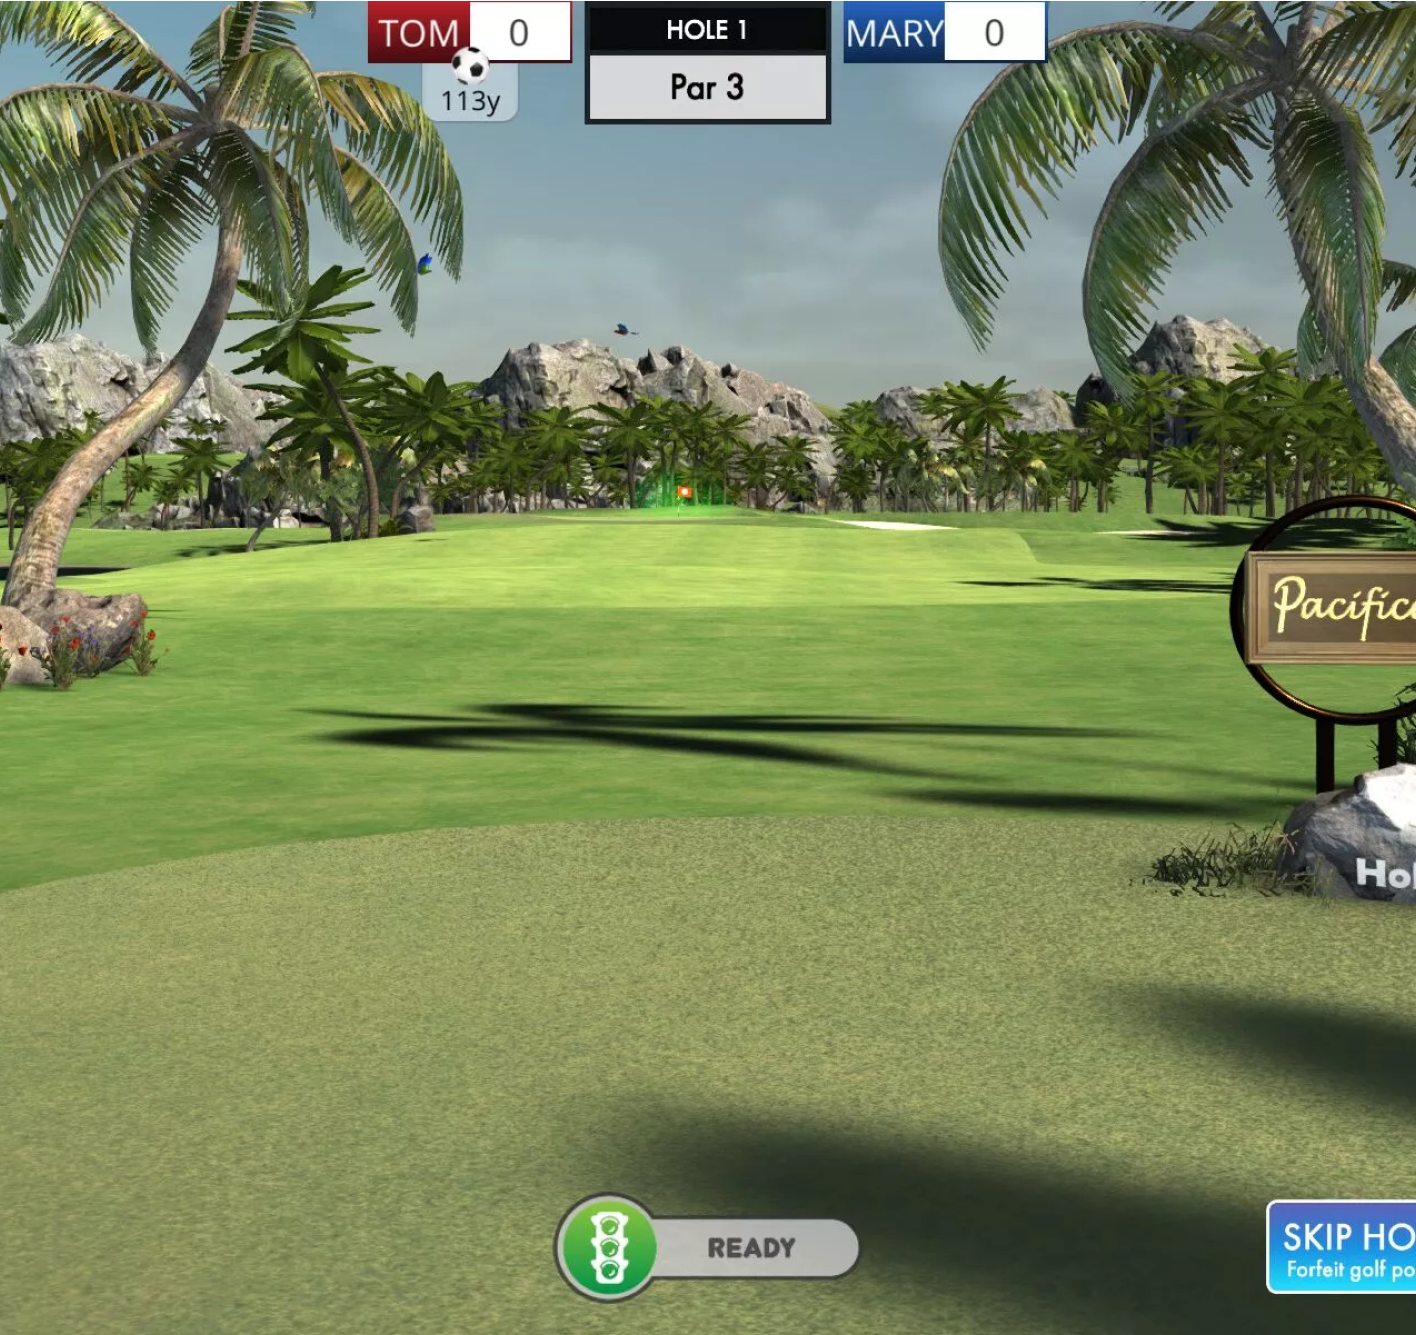 Target Golf Touchscreen Games // Hire Interactive Sports & Games